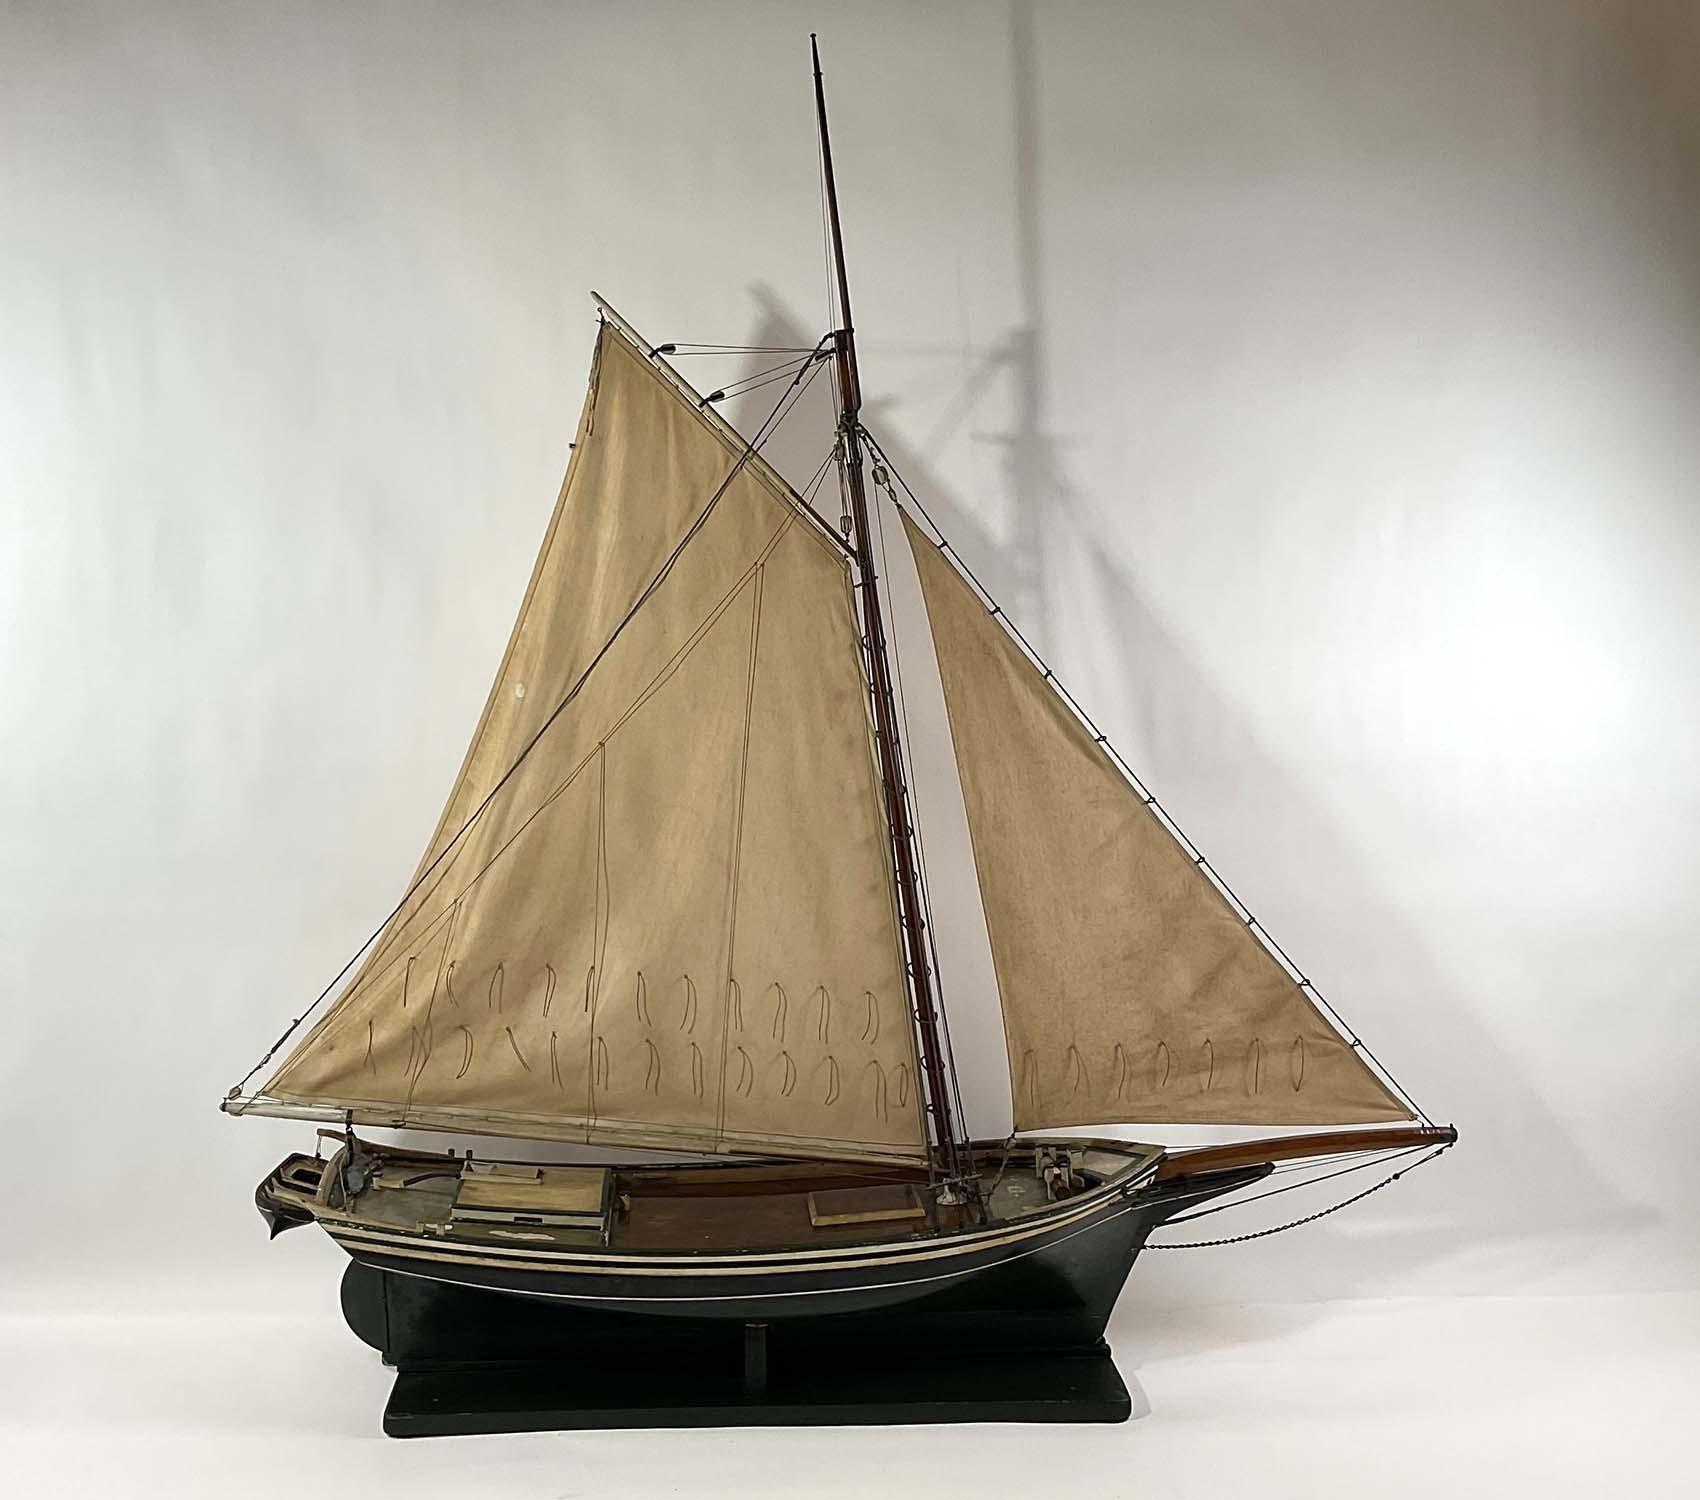 Period model of the sloop Fanny Fern of Quincy Mass. Exceptional antique model that shows the craft in great detail including the bulwarks, cabin, hatch, launch, winch, etc. Fitted with a pair of accurate sails. Set on a wood cradle. Late nineteenth